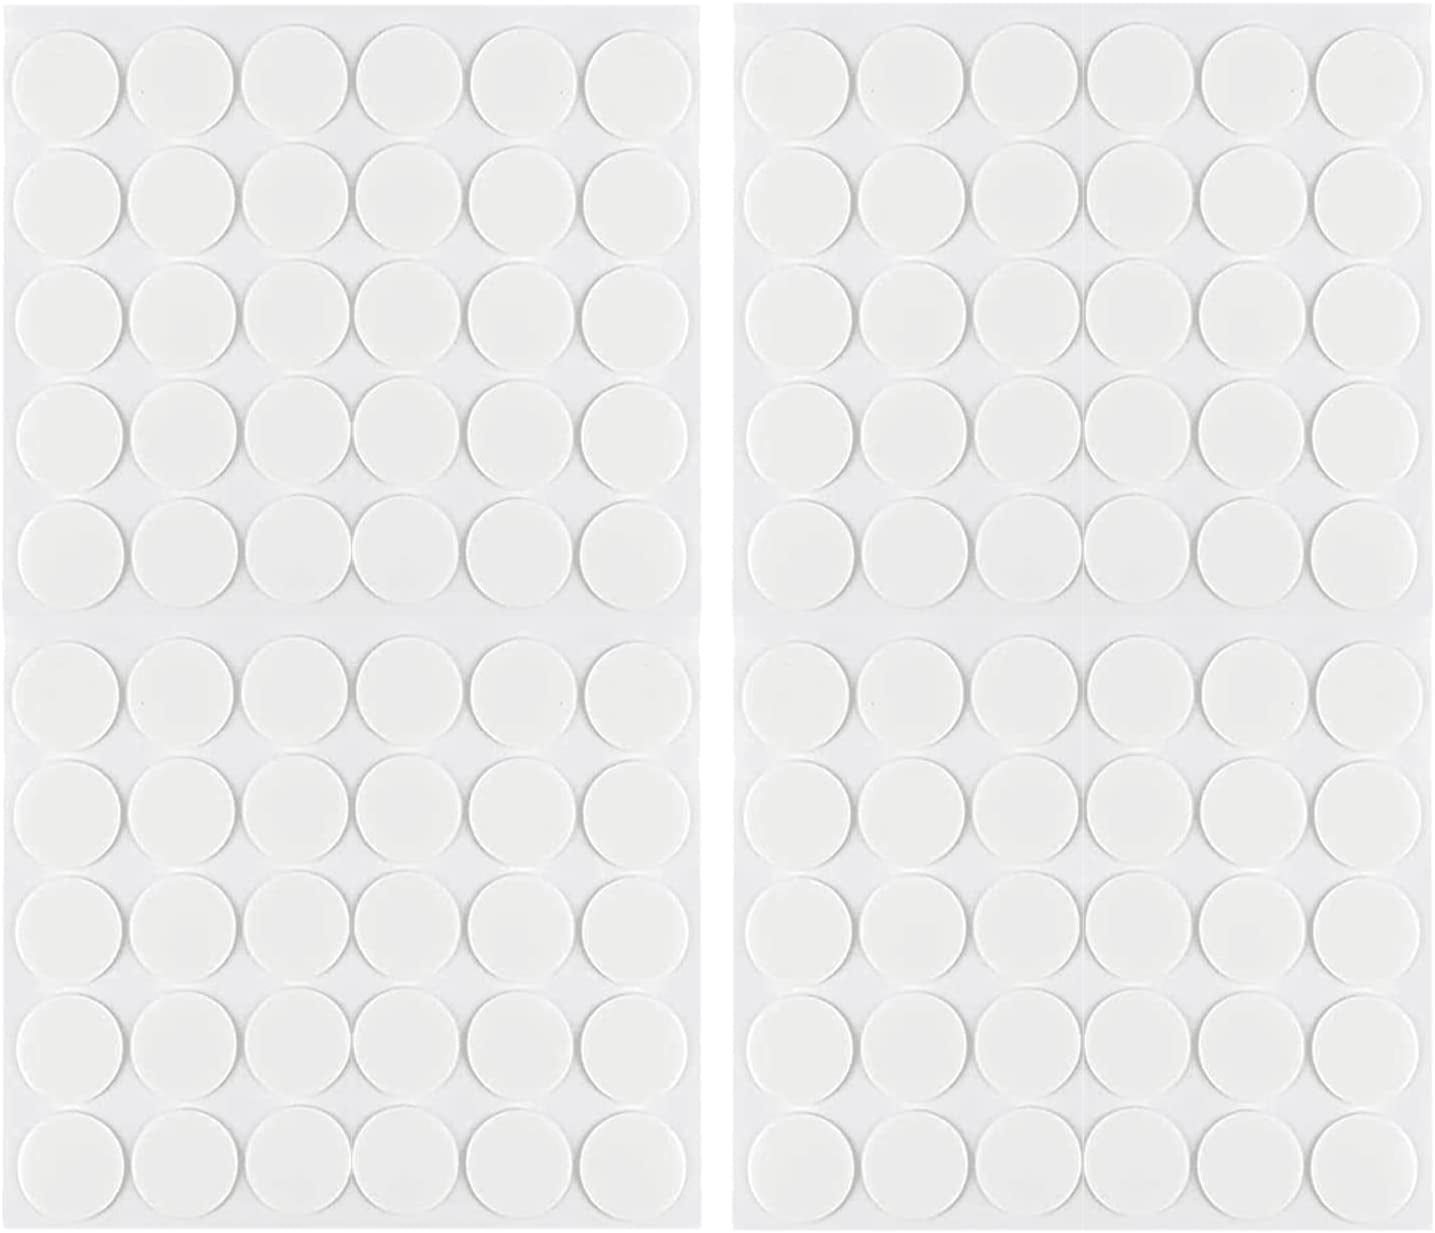 Hearth & Harbor Pack of 500 Candle Wick Stickers for Candle Making - Double Sided, Heat Resistent, Adhere Stable, 20mm Round, Size: 20 mm